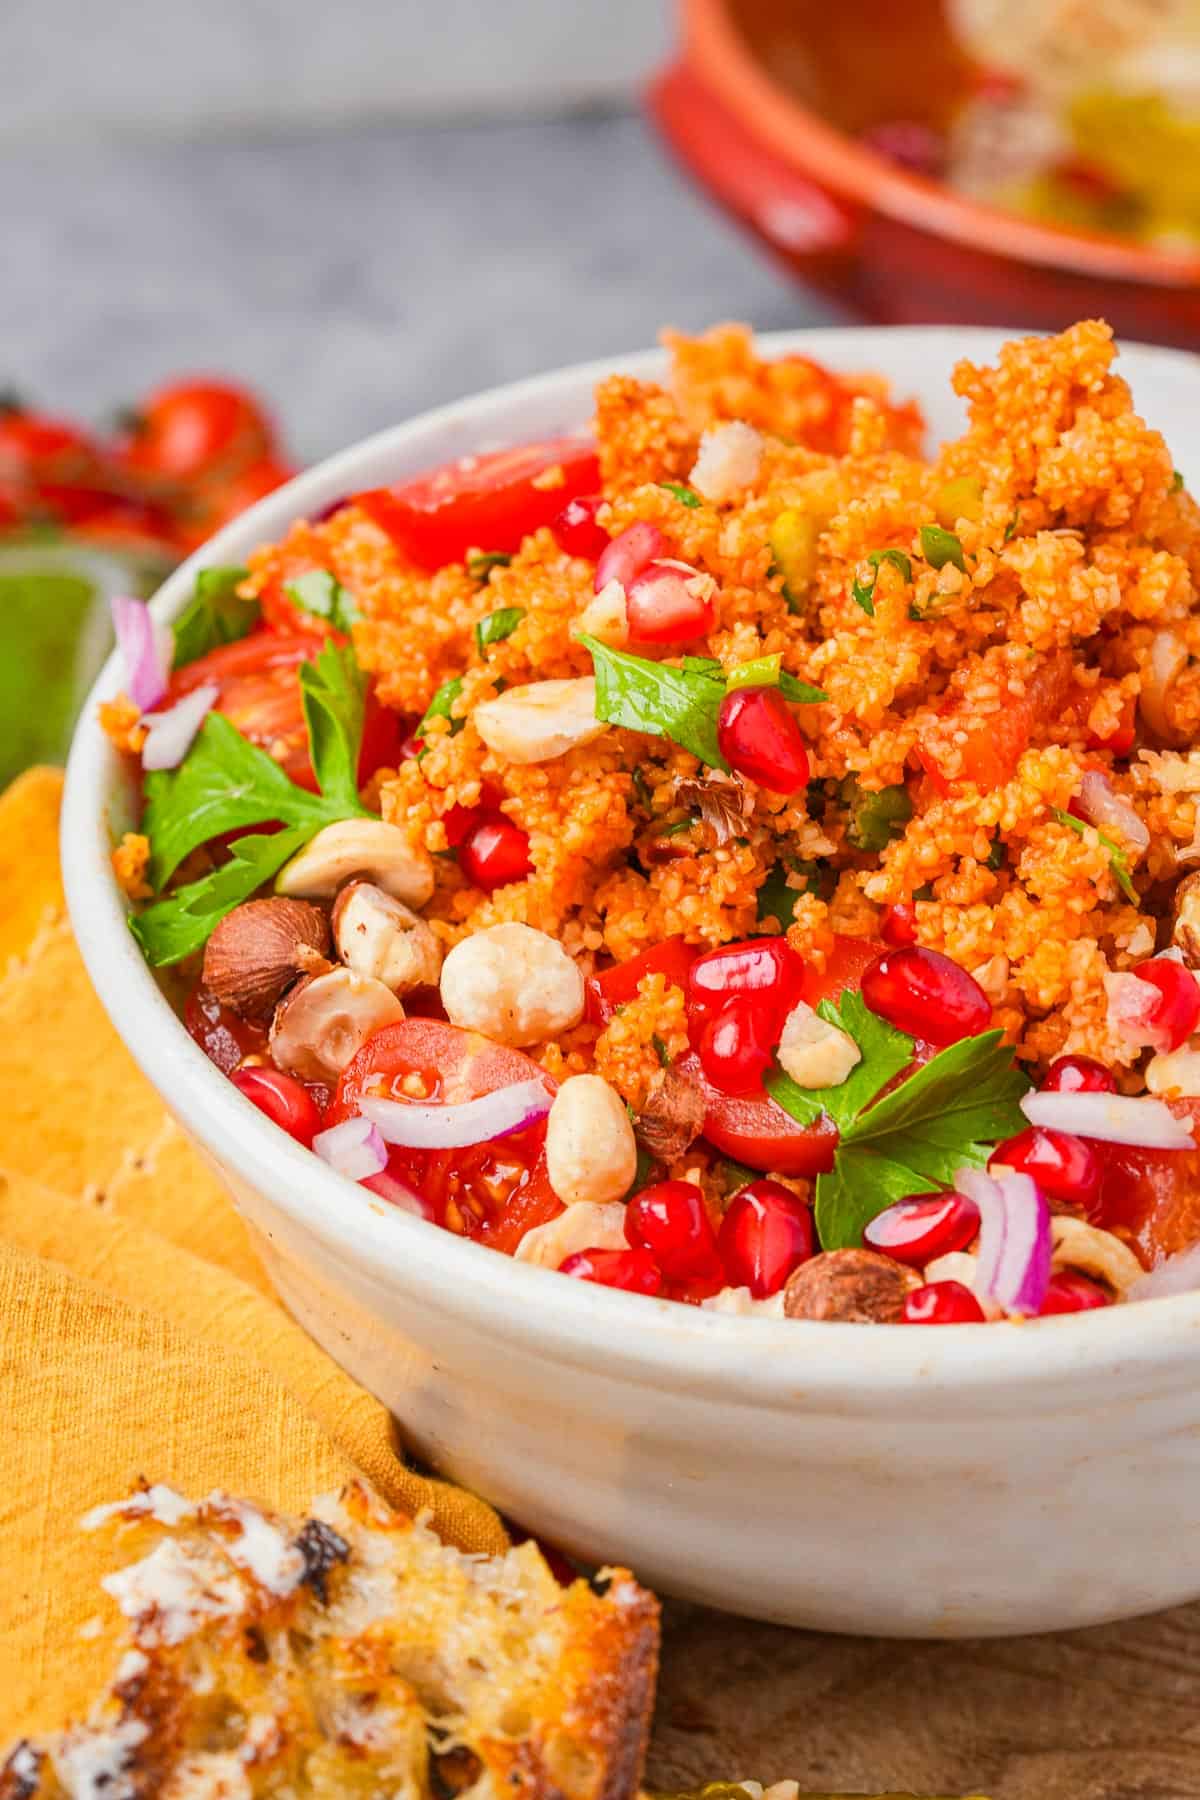 A bowl of kisir bulgur salad with tomatoes, herbs, pomegranate seeds, and nuts.